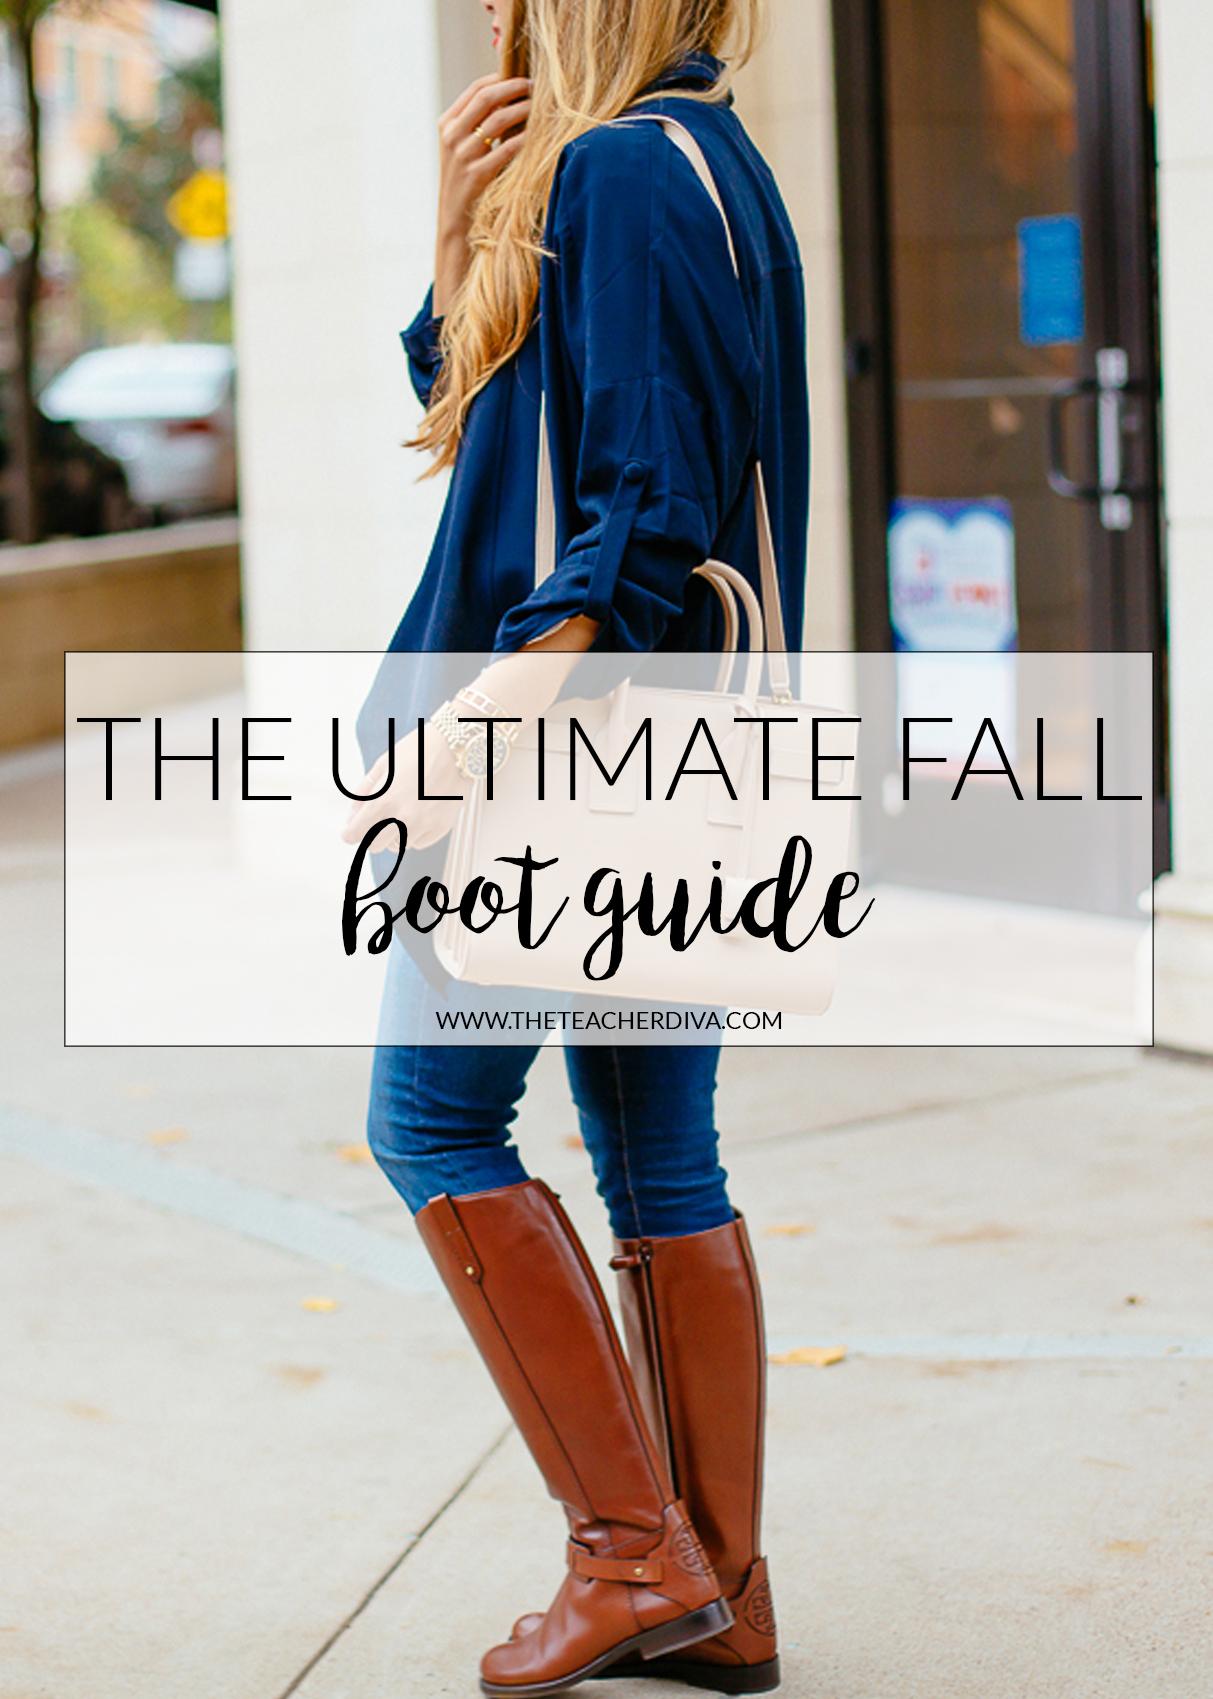 10 Ankle Boots For Fall 2016 - Best Booties Fall 2016